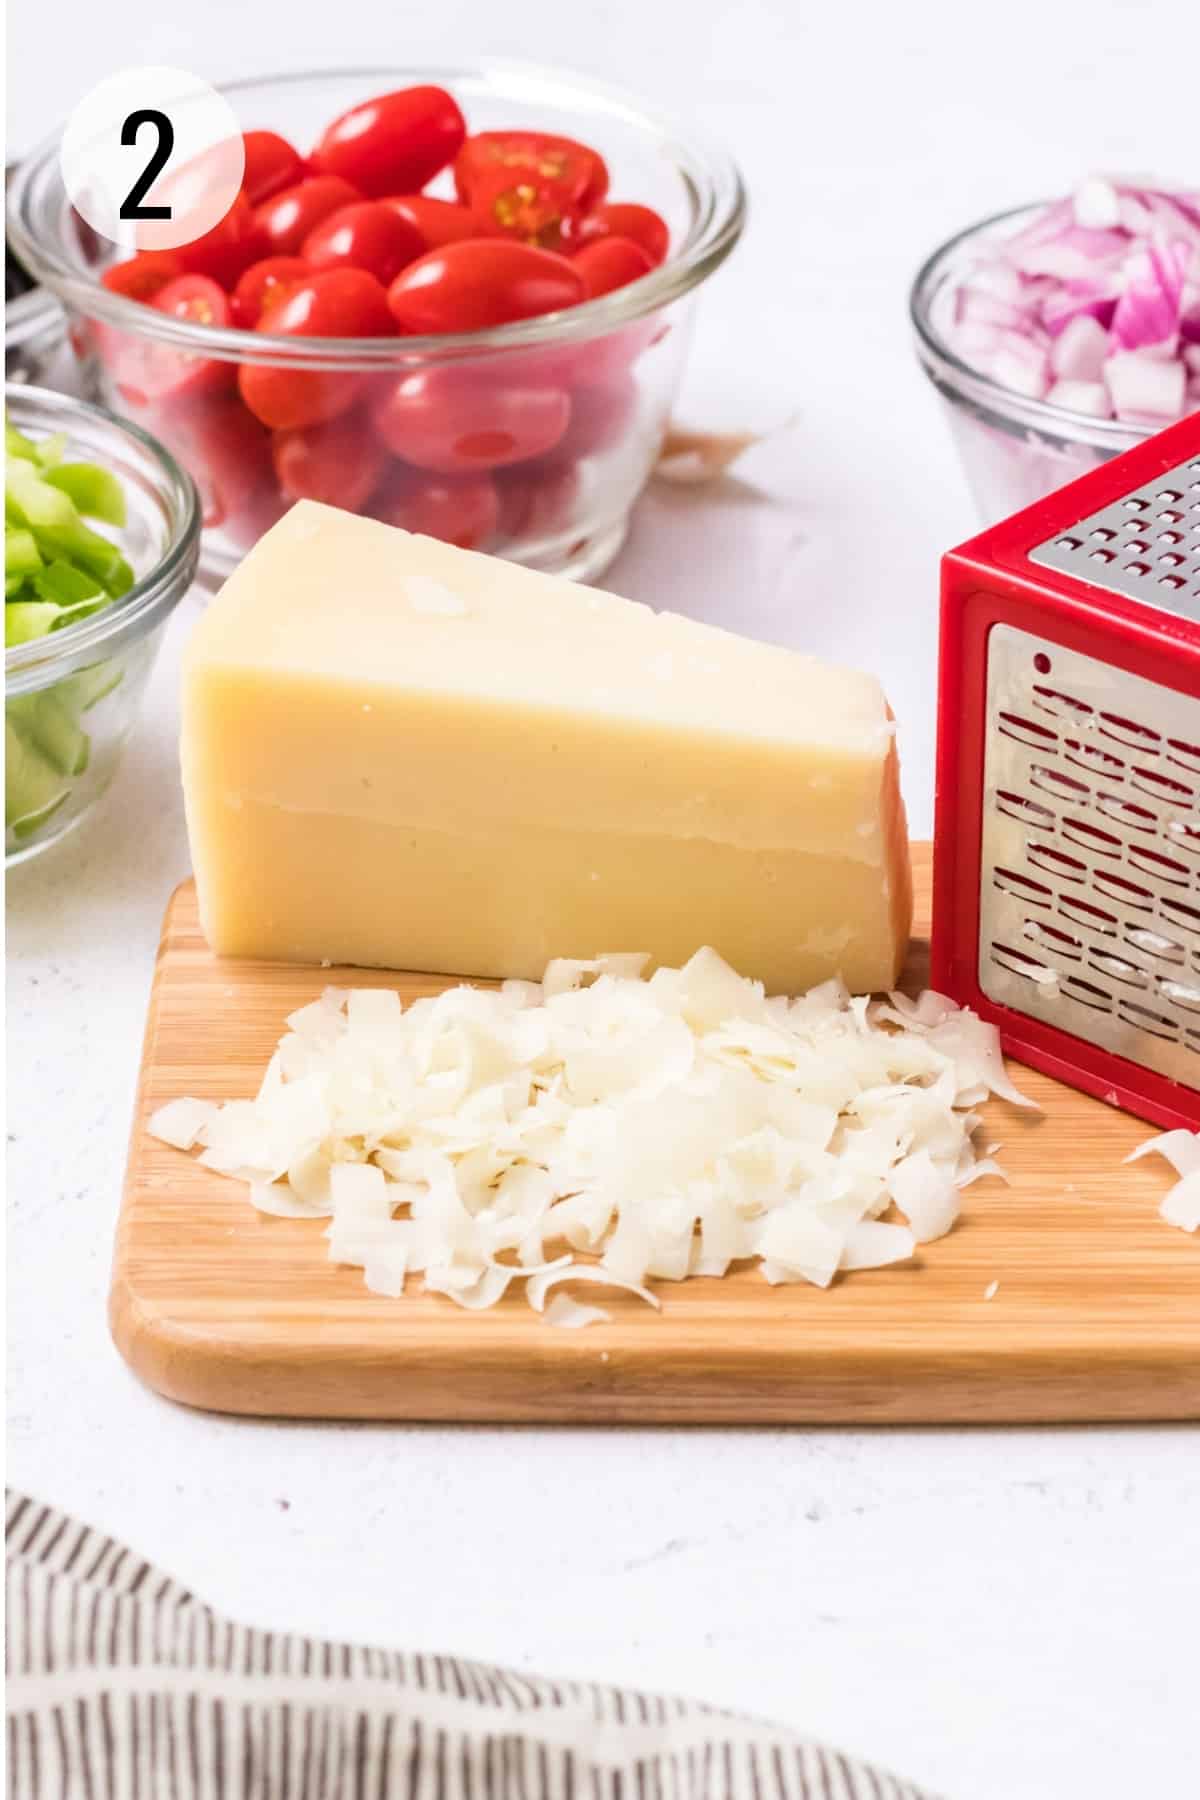 Piece of Parmesan cheese with shredded cheese using a red and silver box grater and bowls of tomatoes, green bell pepper and red onions surrounding. 